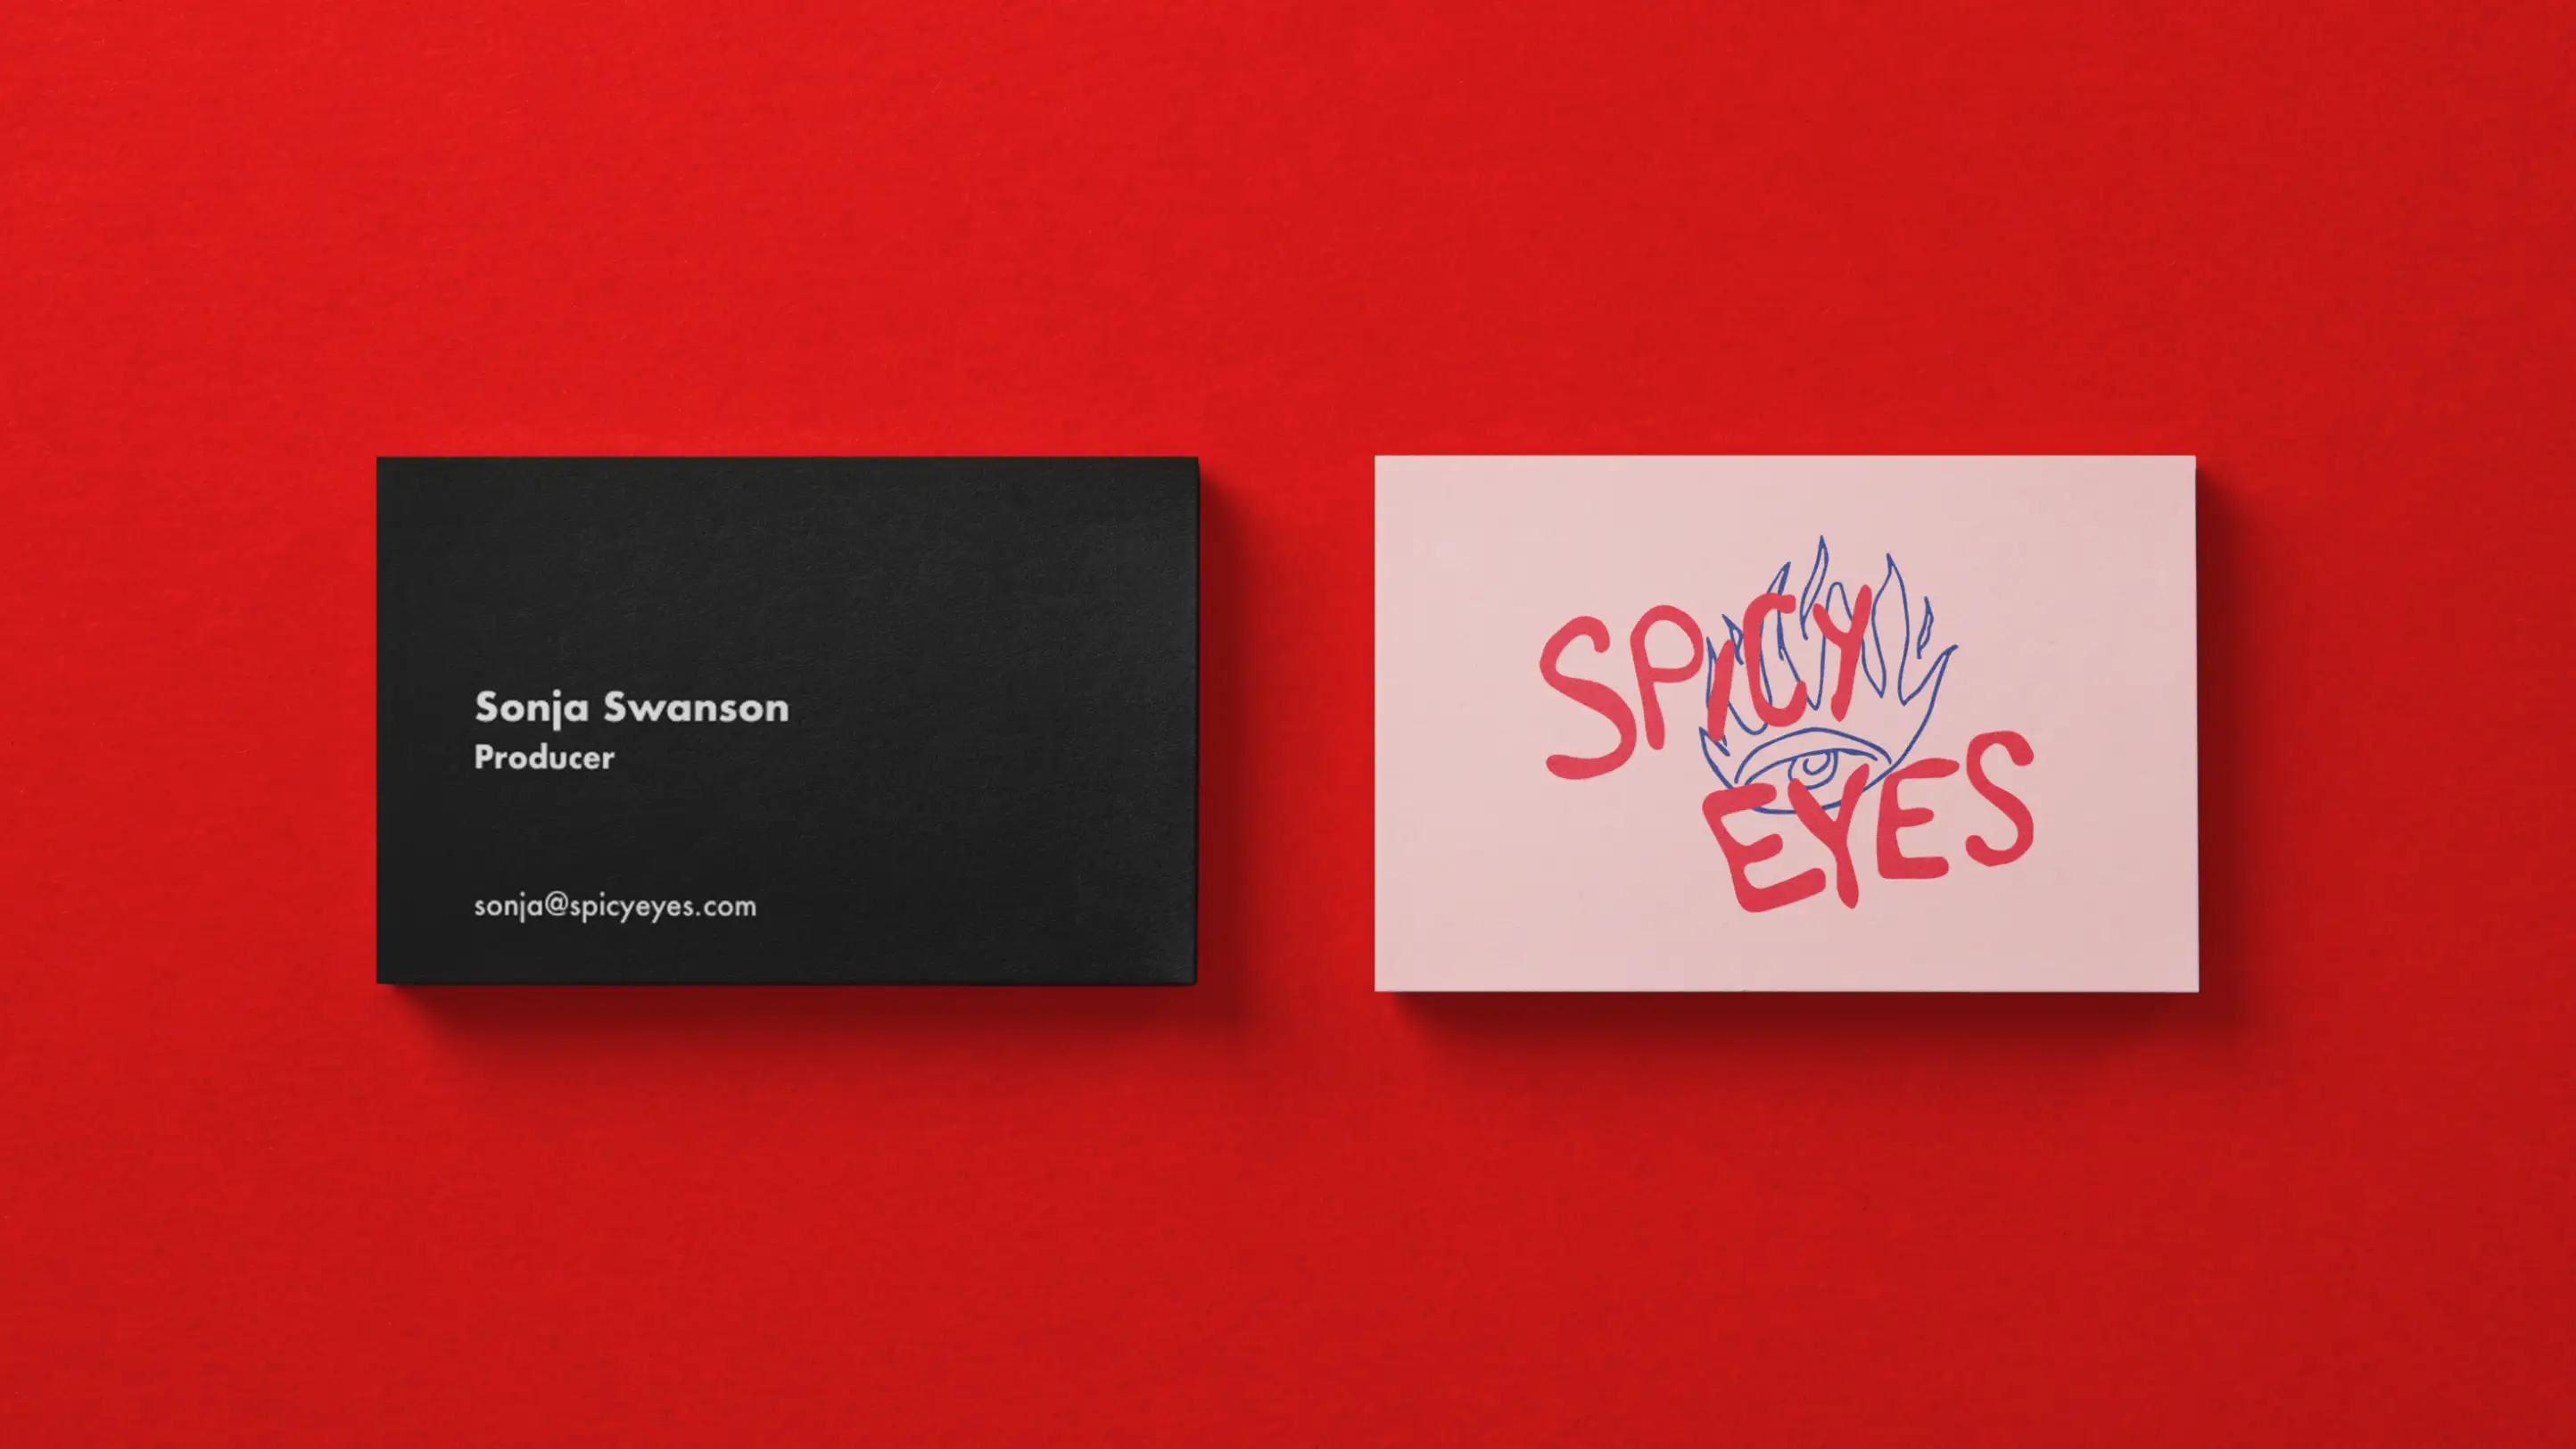 Spicy Eyes business card design.